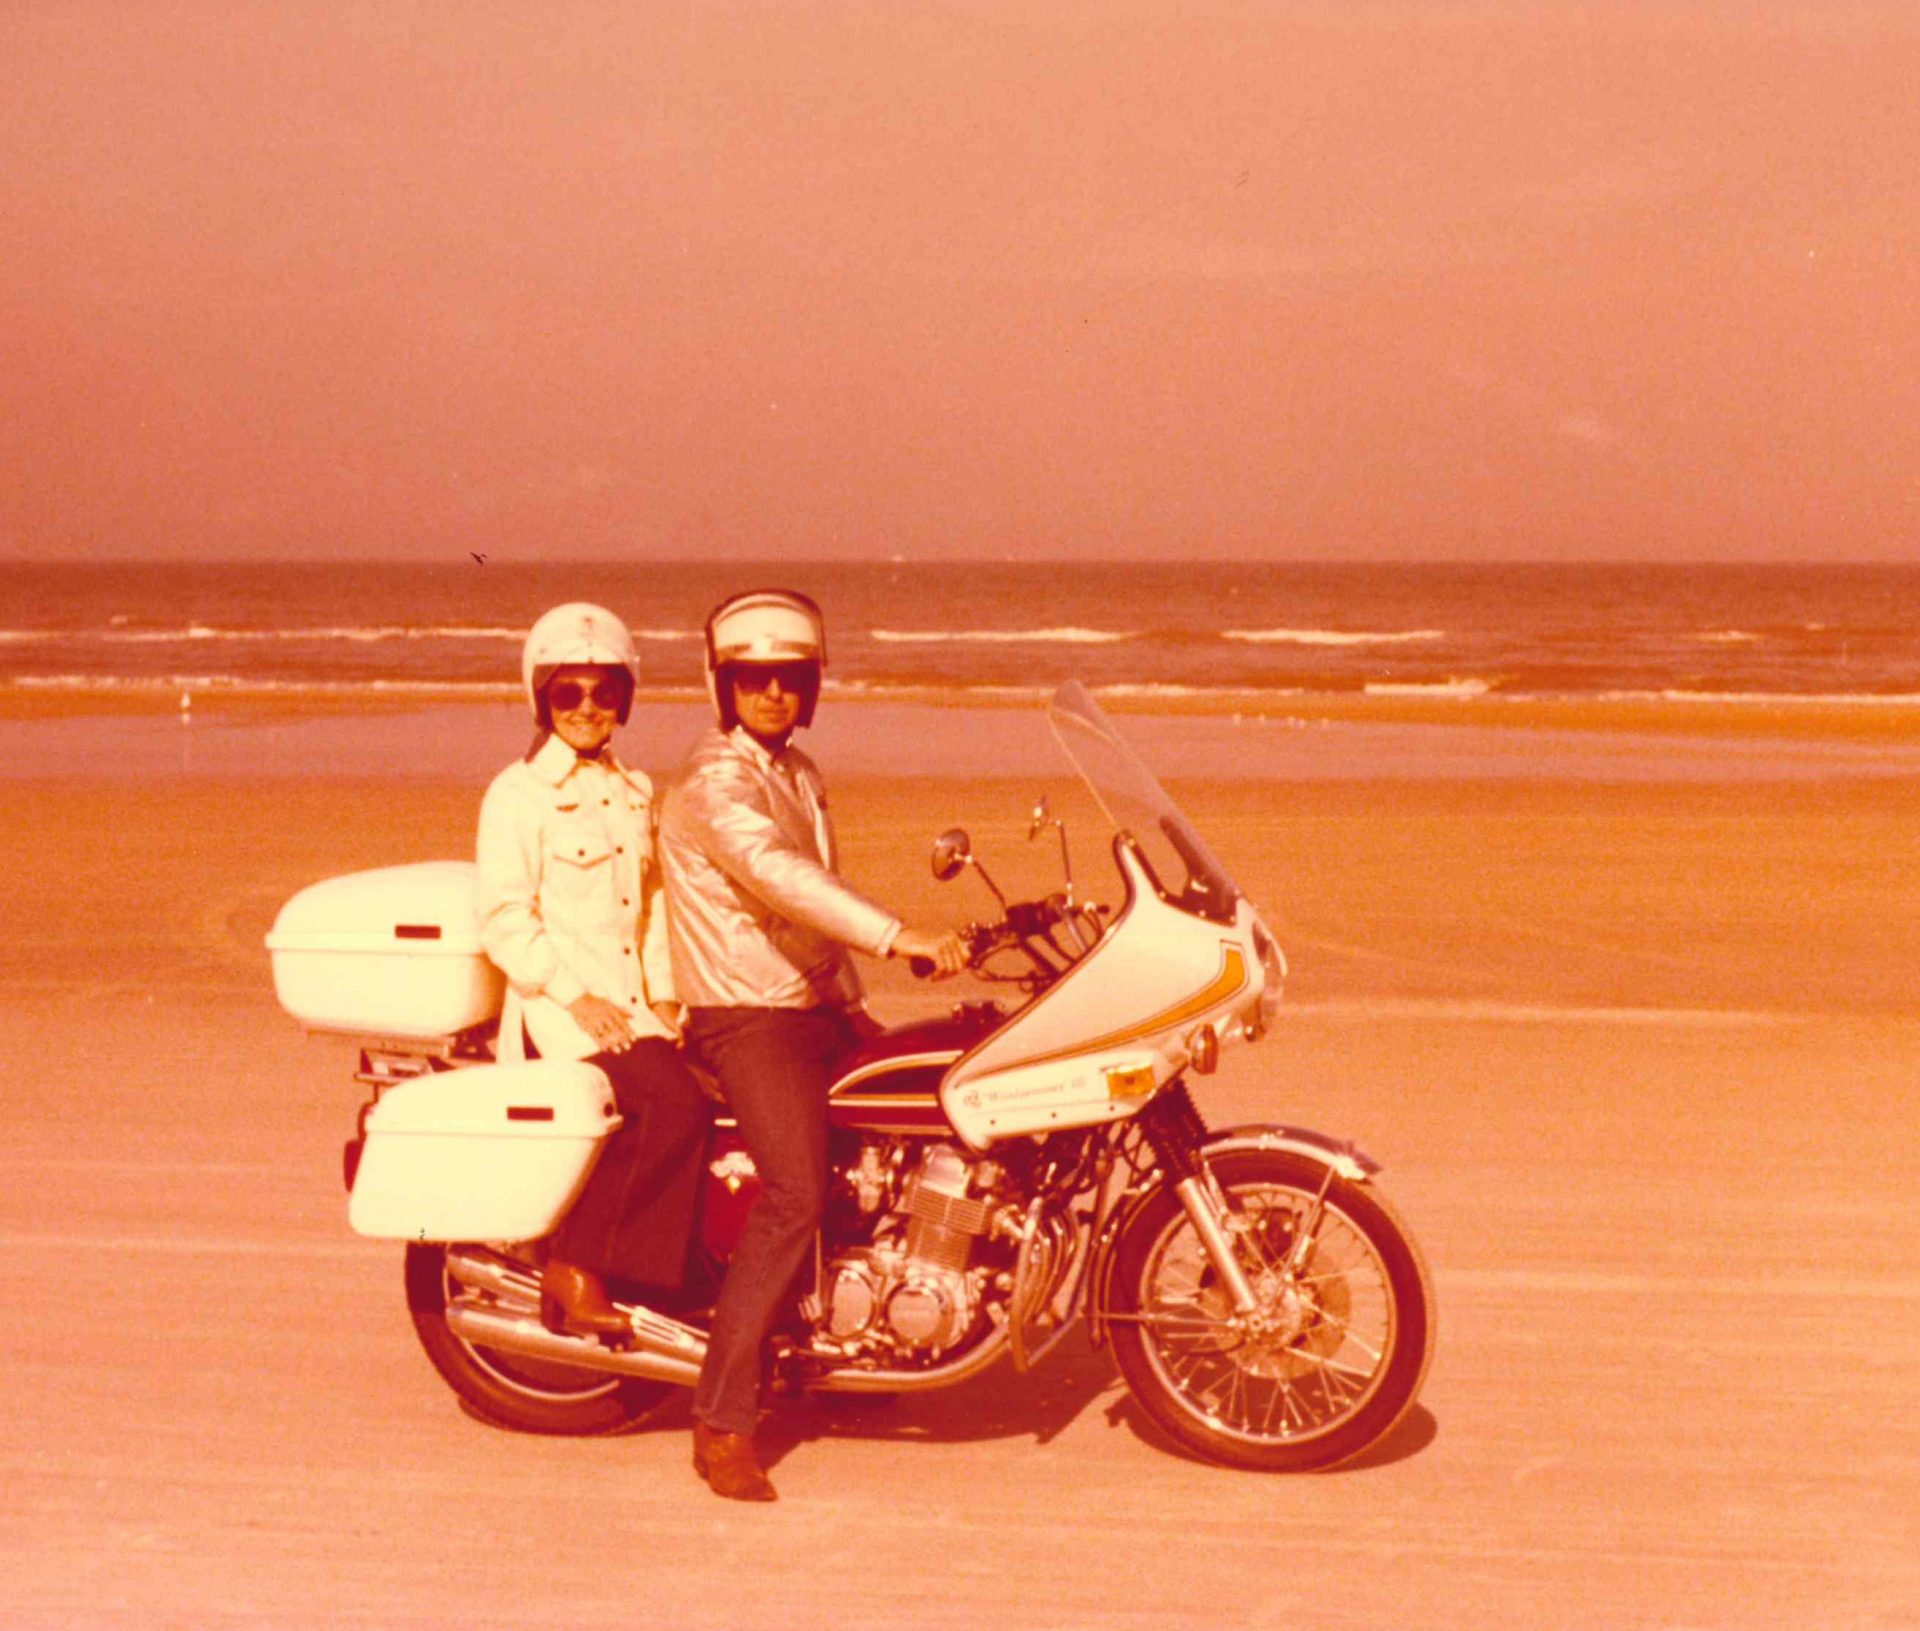 George and Elaine riding together on the beach